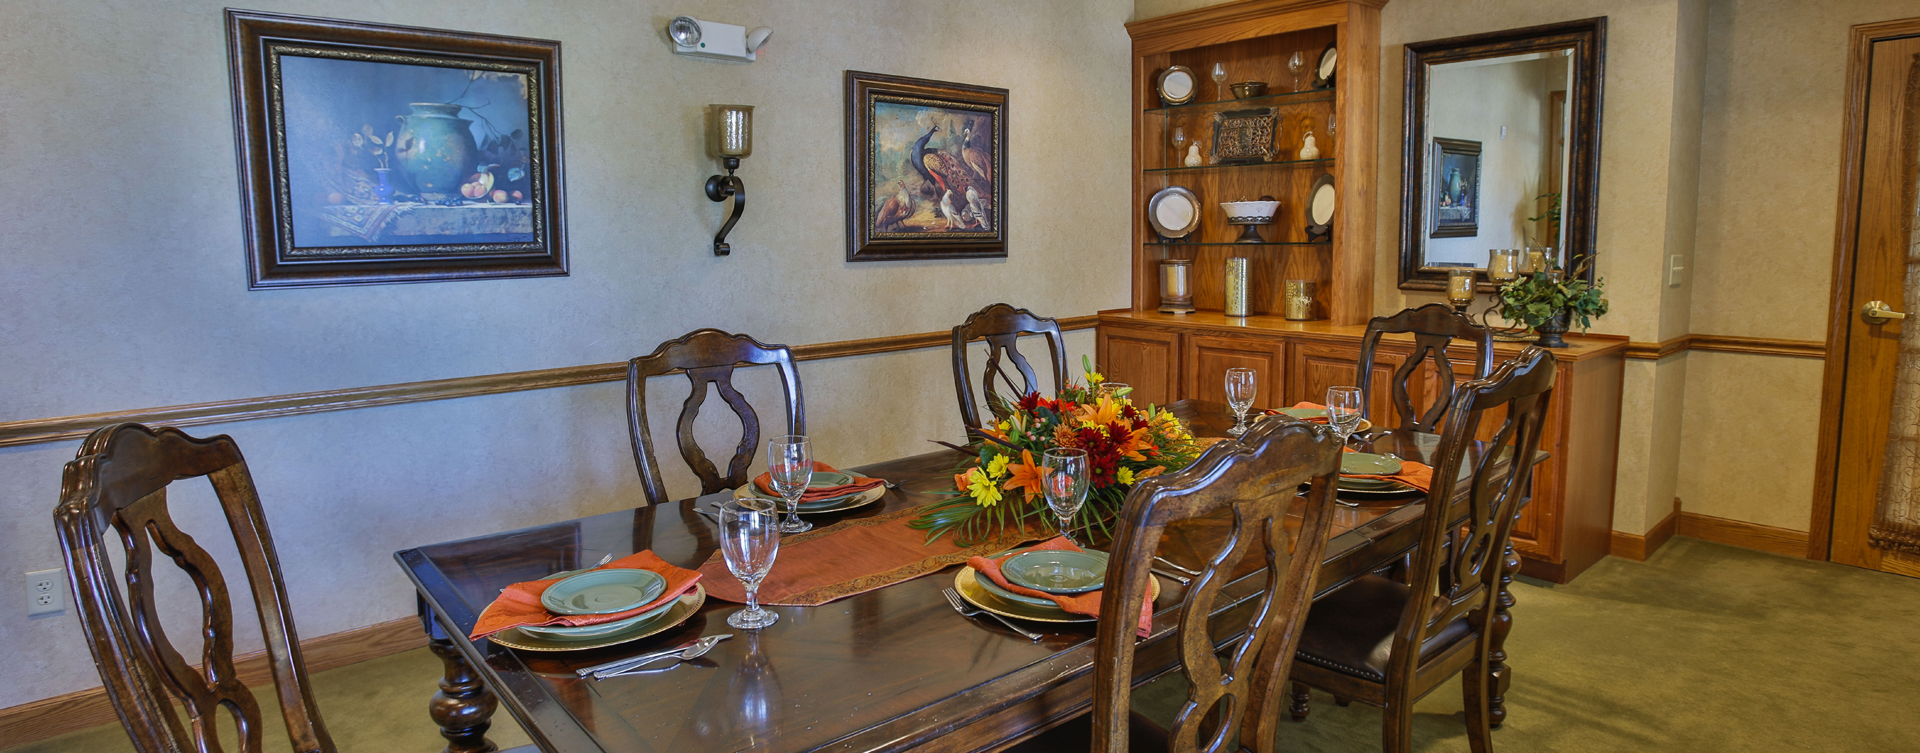 Have fun with themed and holiday meals in the private dining room at Bickford of Peoria